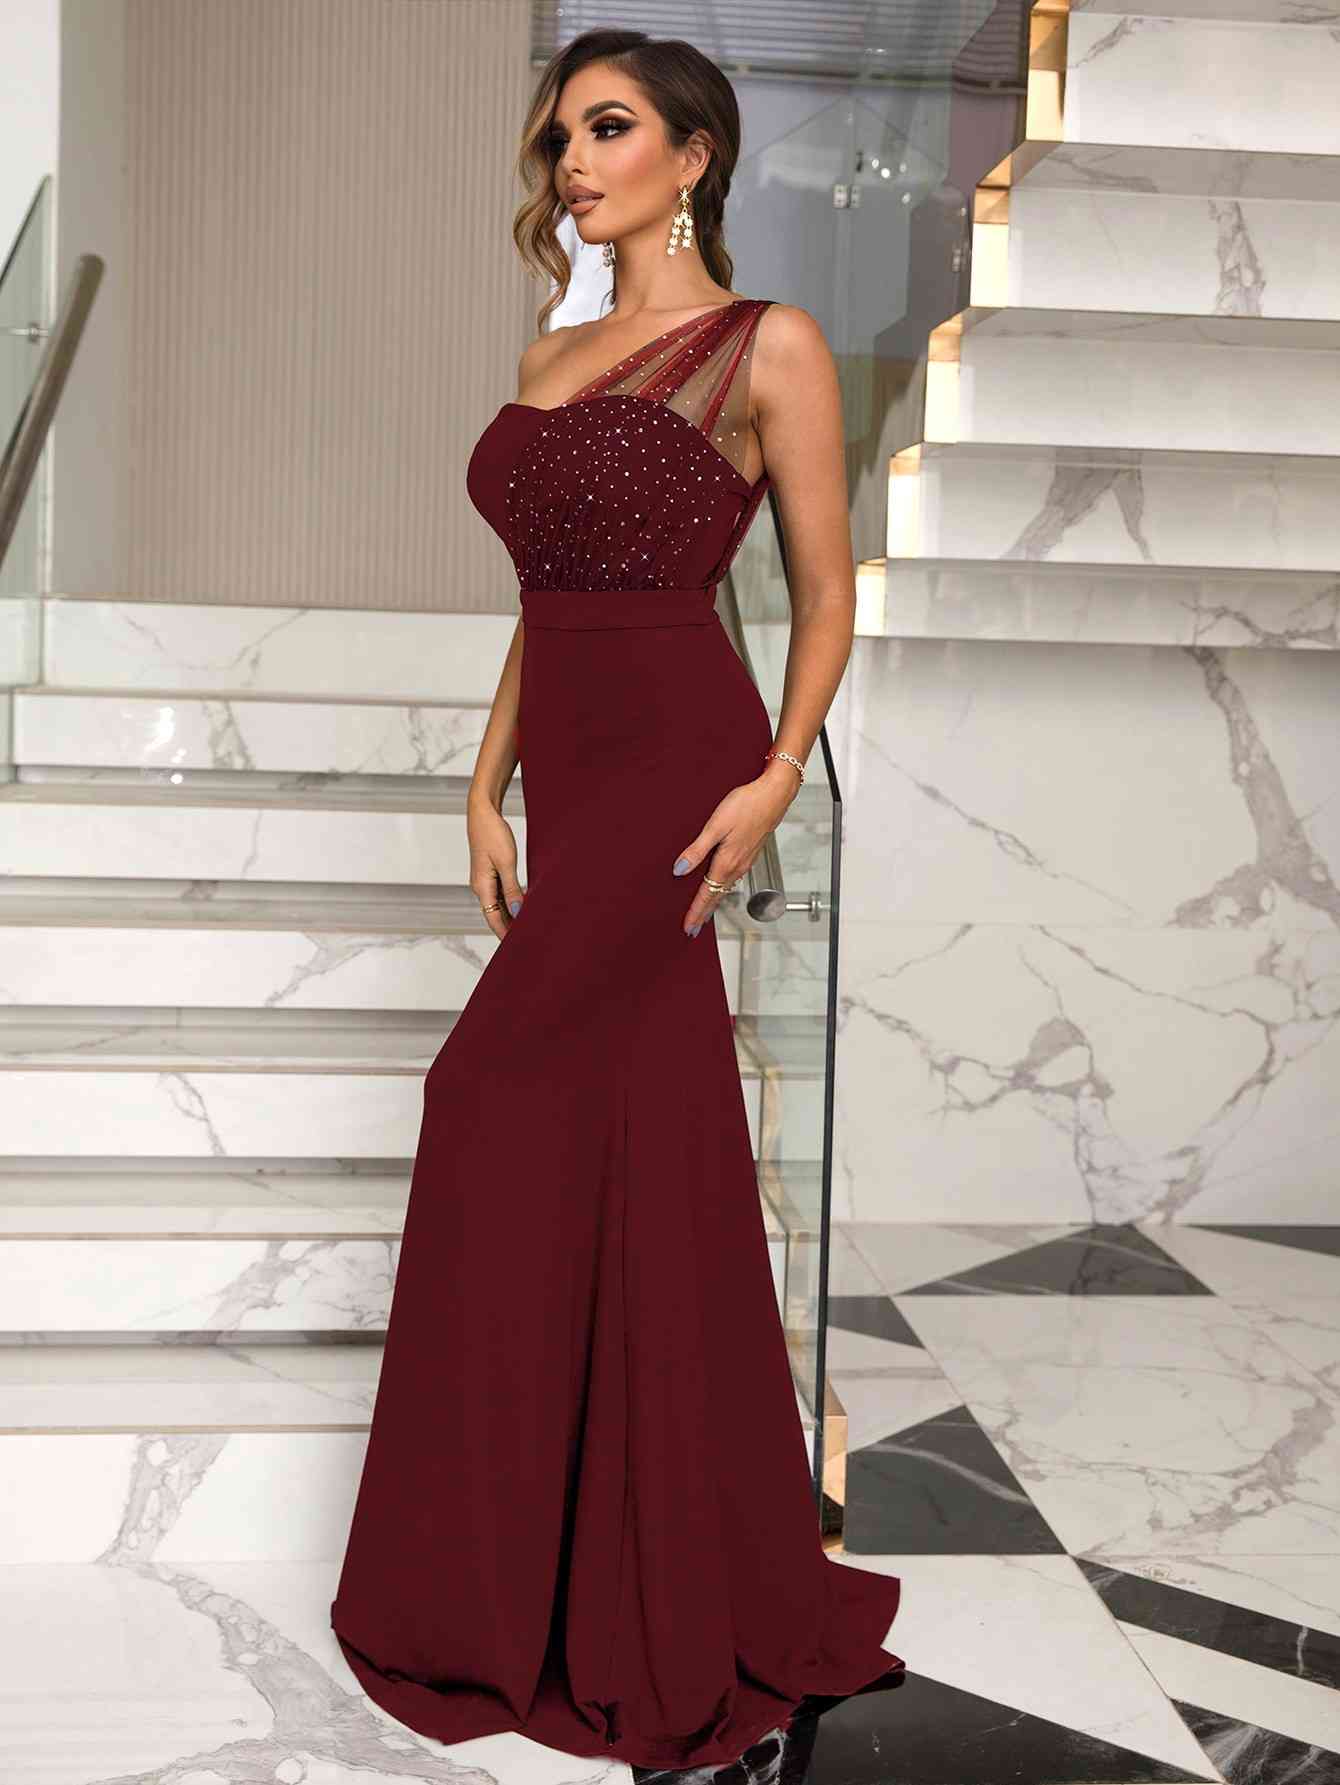 Elegant Rhinestone One-Shoulder Formal Dress | Perfect for Special Occasions